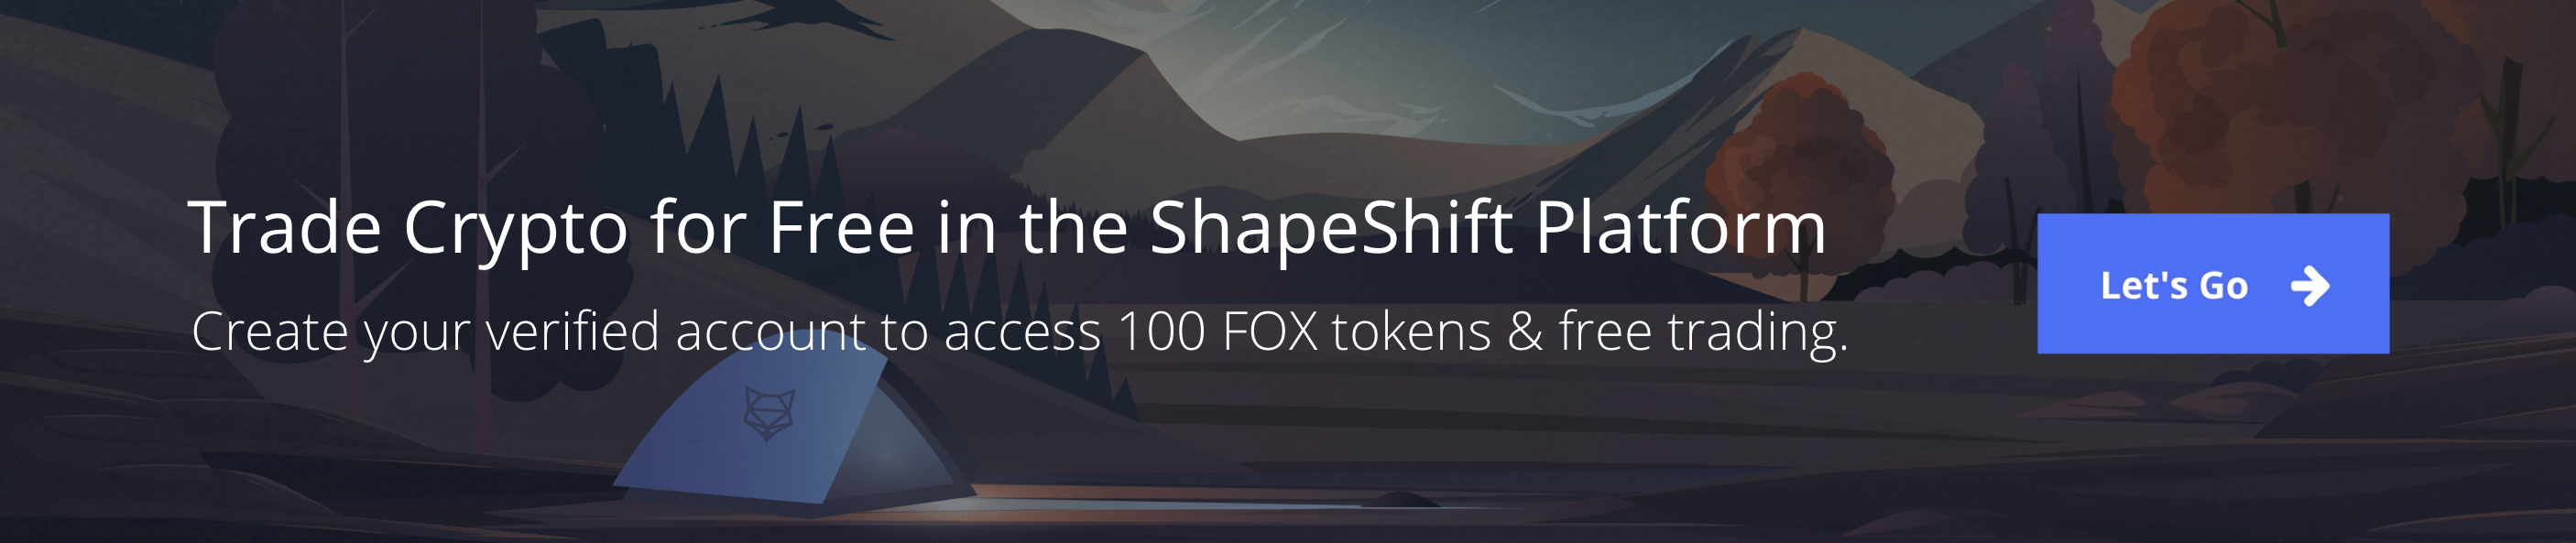 Receive 100 FOX tokens when you create a ShapeShift account. Trade crypto for free in the ShapeShift Platform. ShapeShift.com